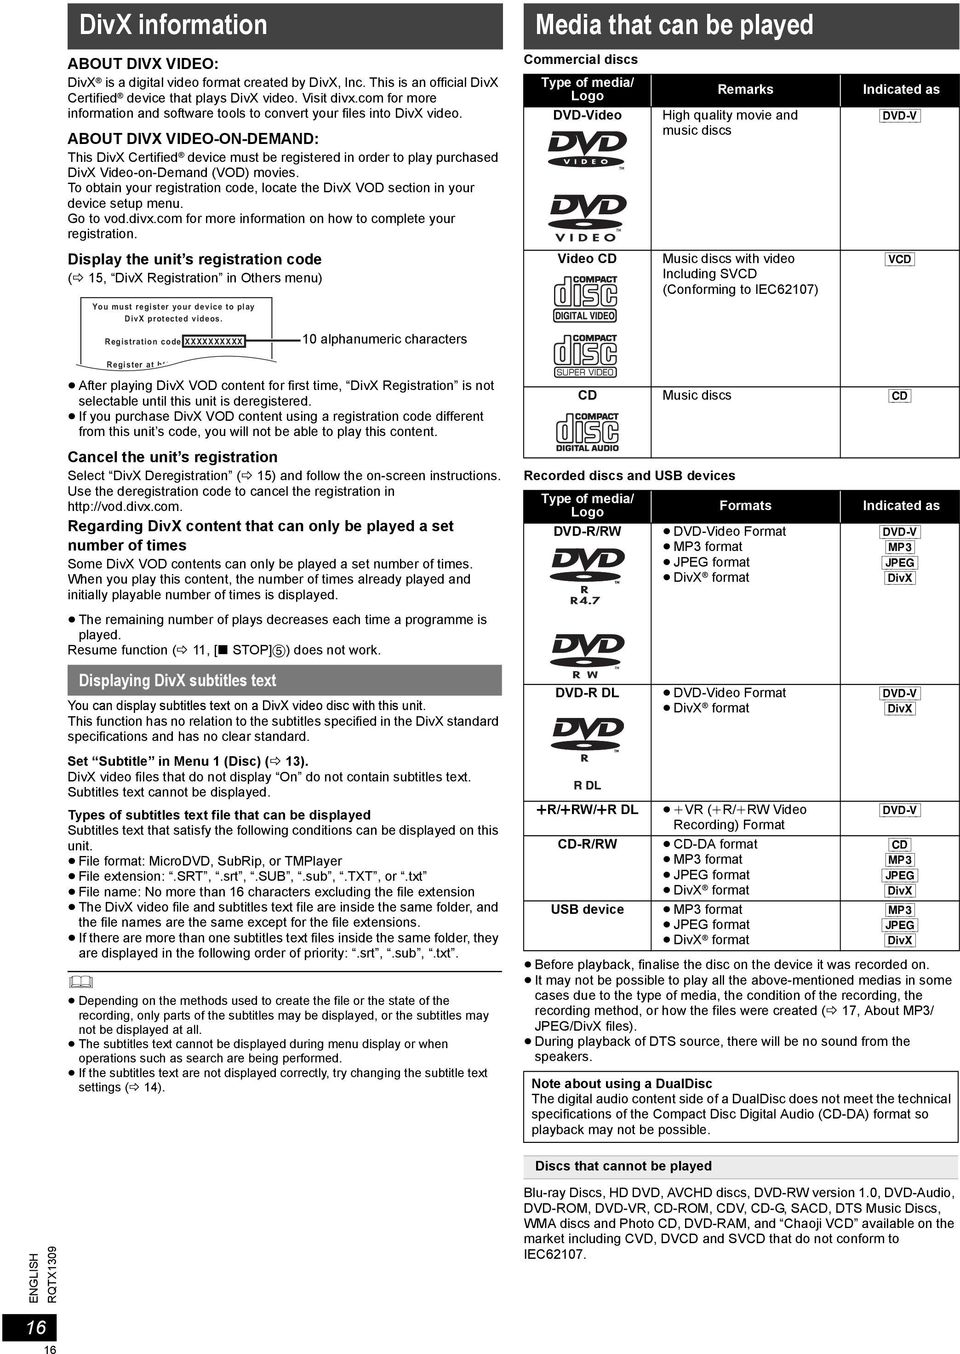 ABOUT DIVX VIDEO-ON-DEMAND: This DivX Certified device must be registered in order to play purchased DivX Video-on-Demand (VOD) movies.